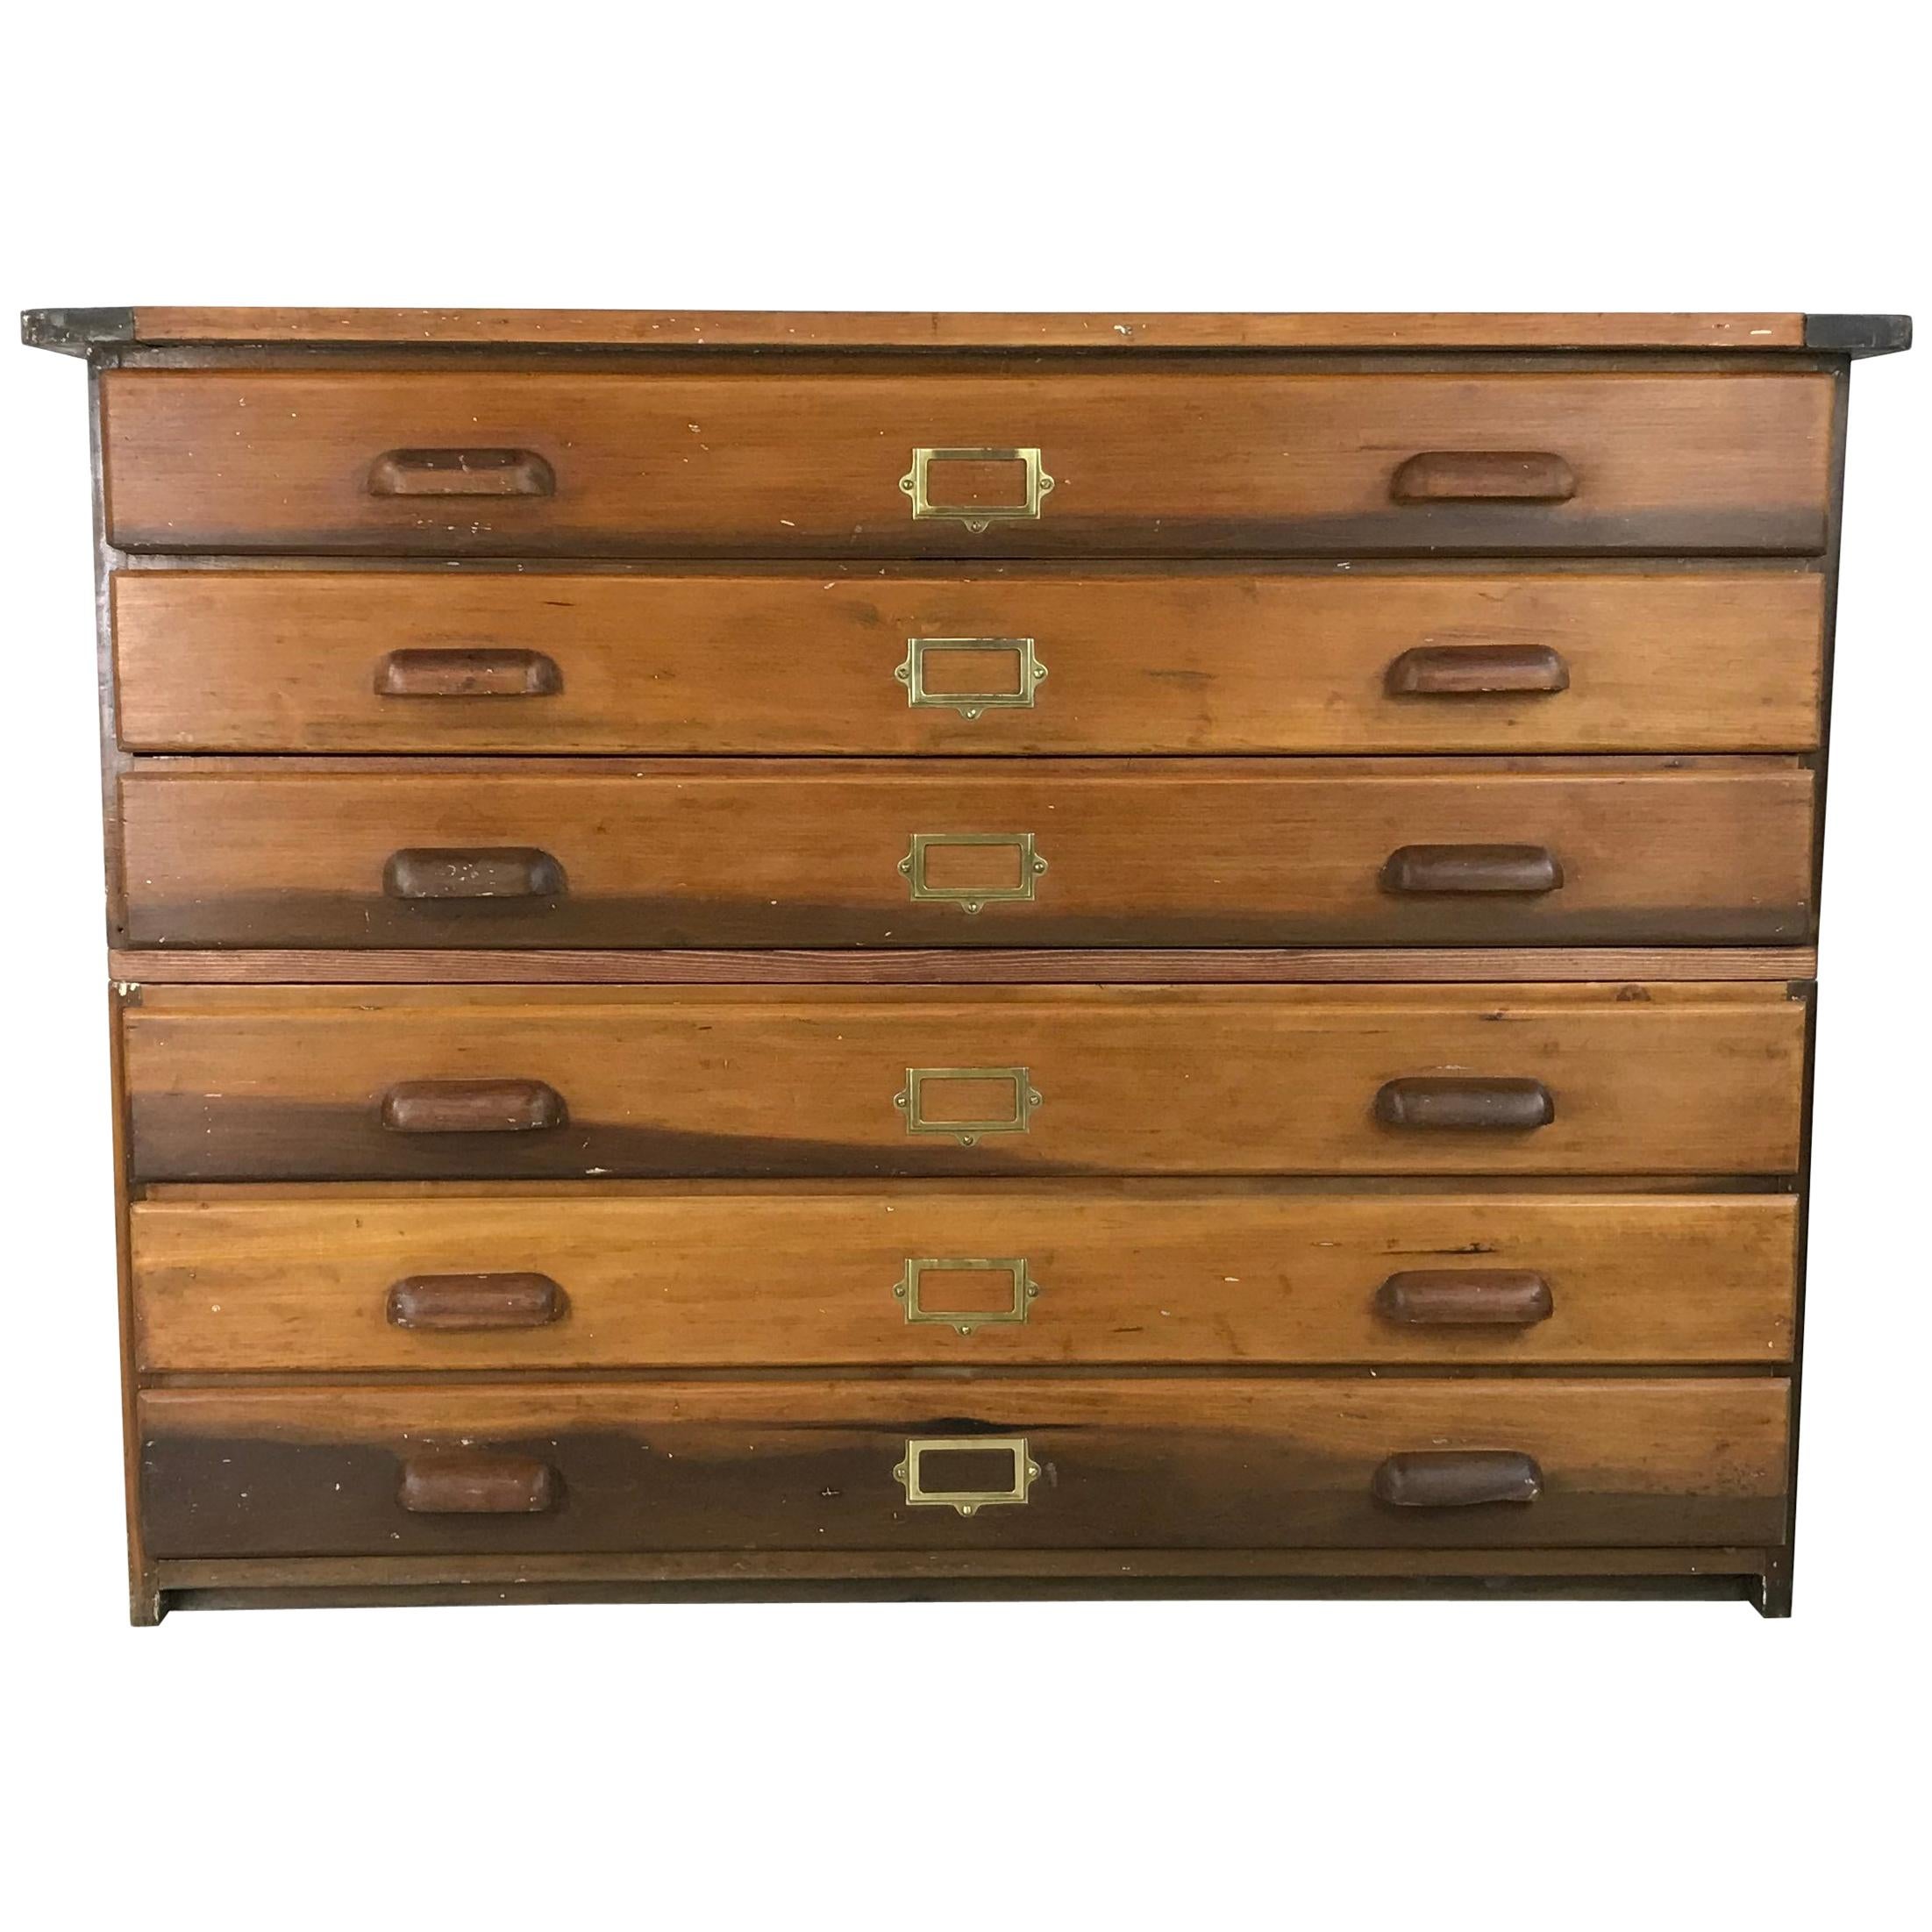 1930s Plan Chest with Brass Cup Handles and Label Inserts